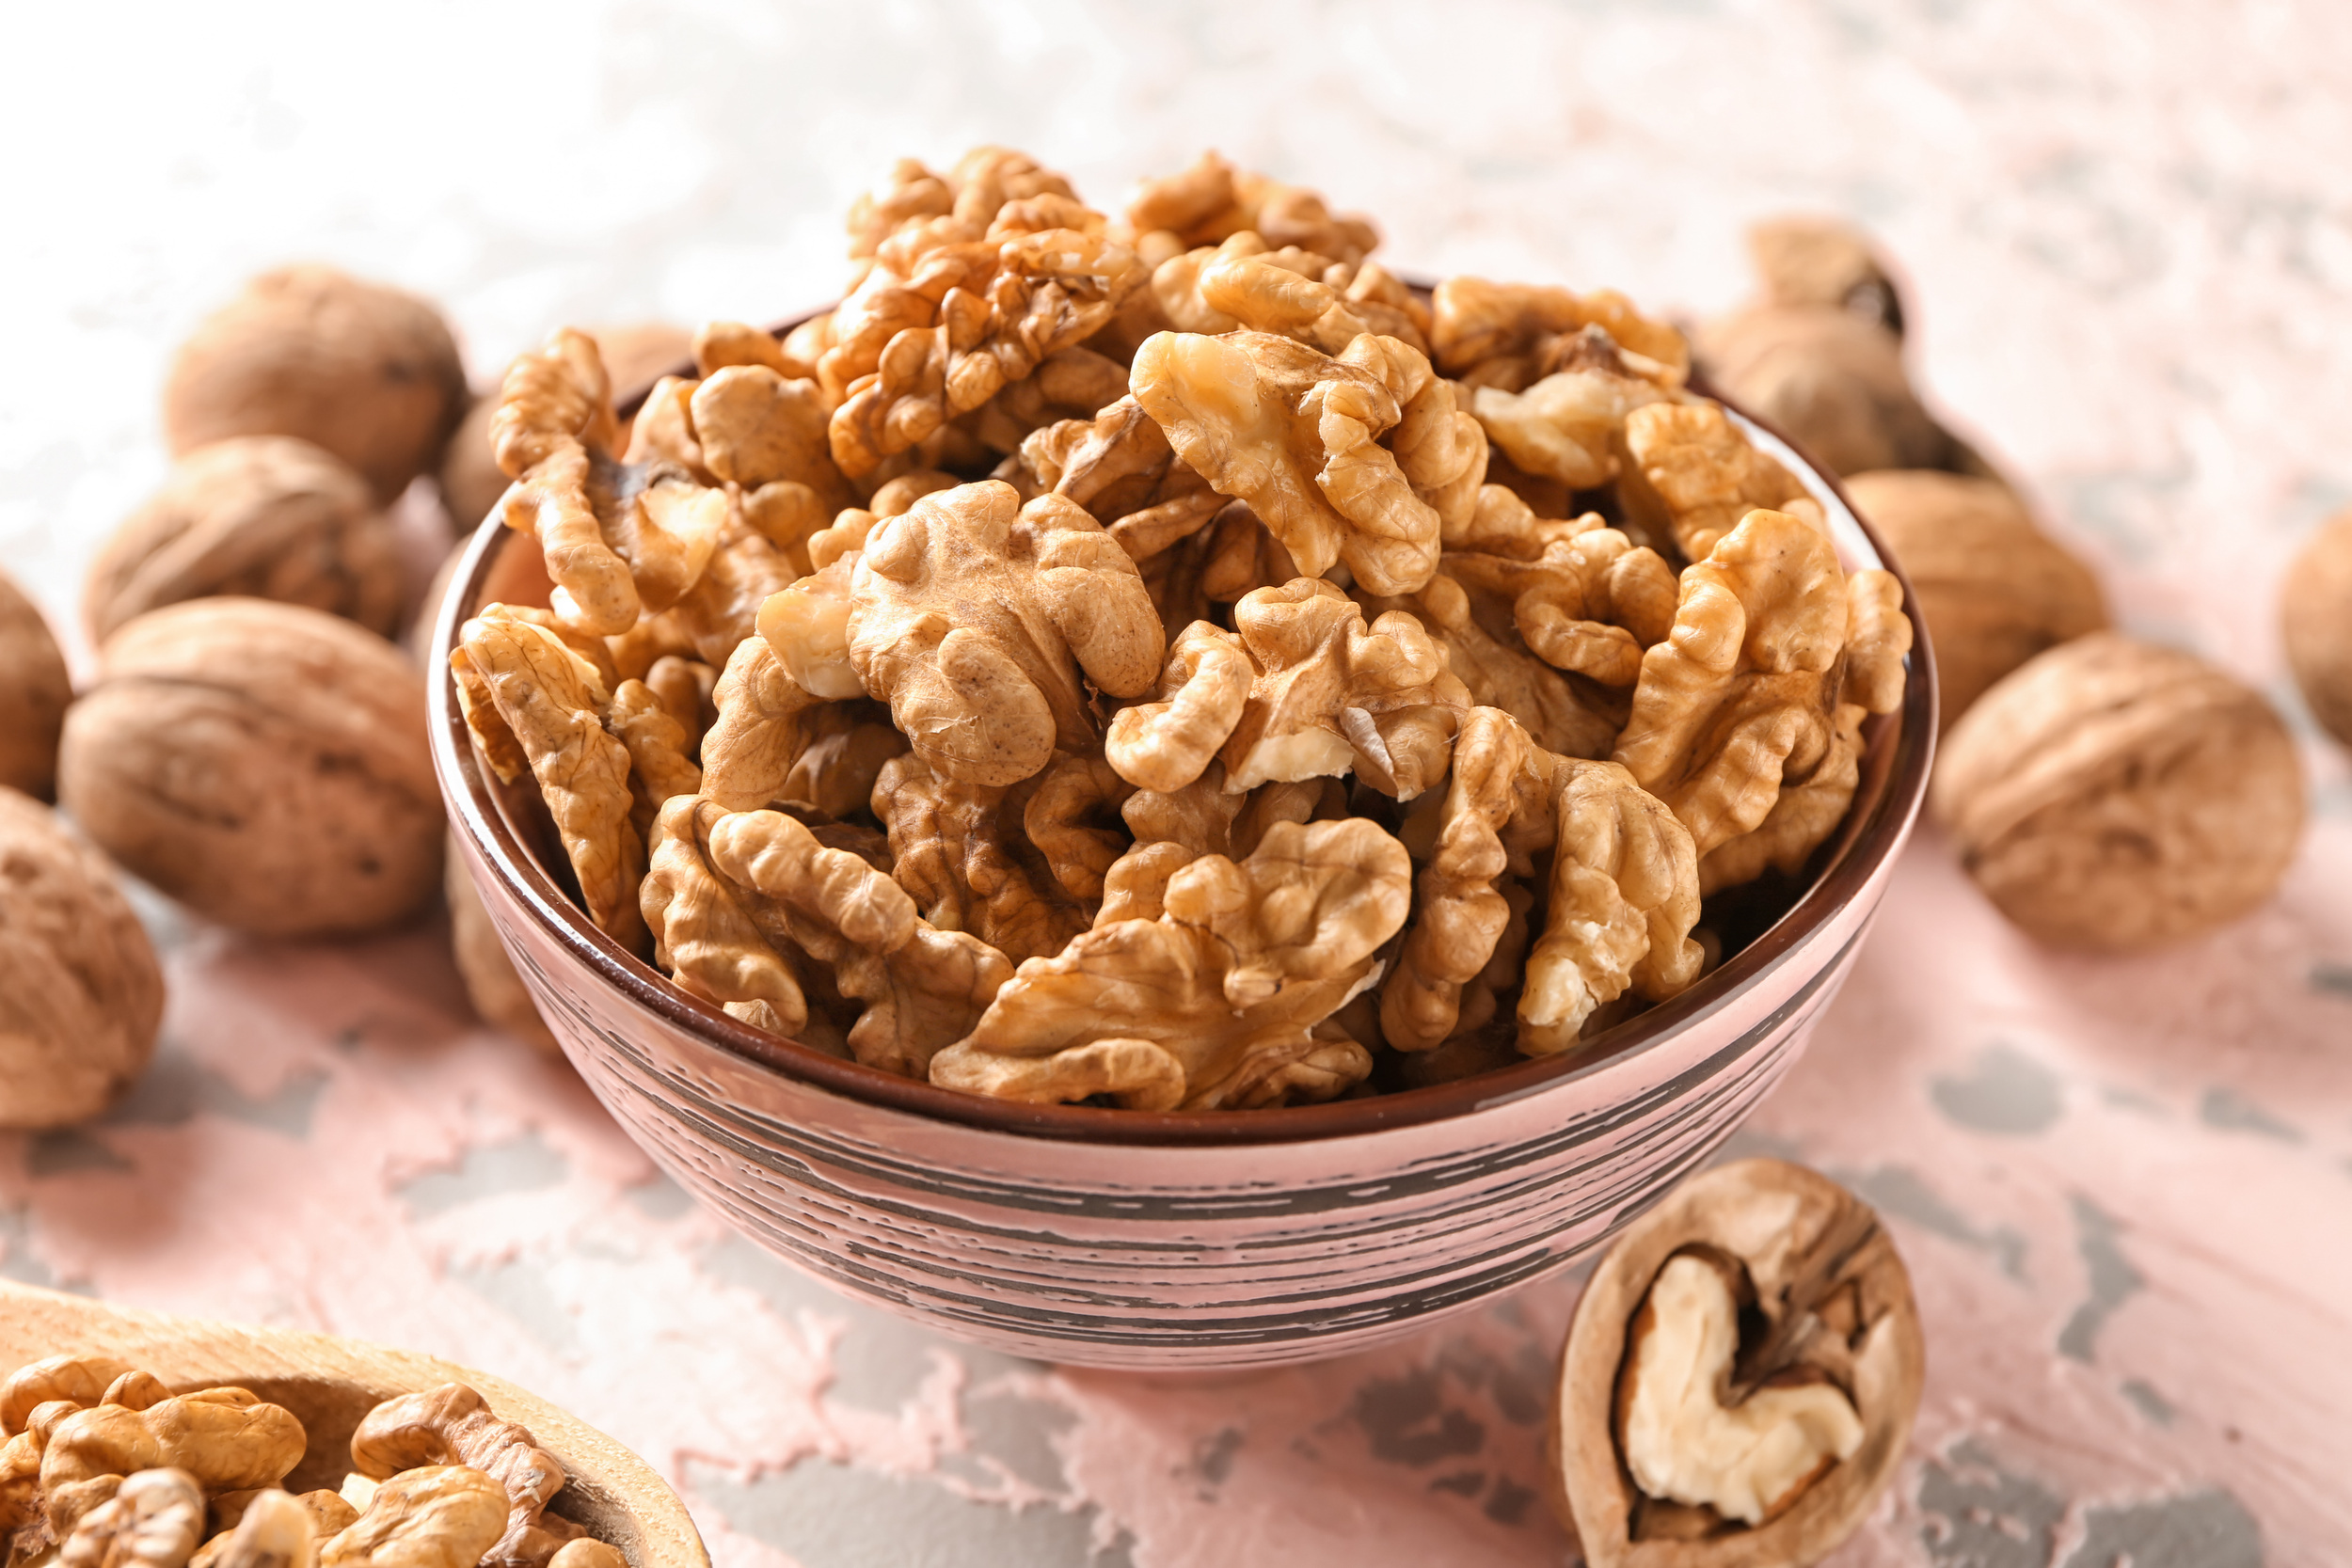 <p>If you like the consistency of pecans but want something a little less sweet, go with walnuts, which are perfect in a trail mix, whether they’re whole or chopped. We also dig the hearty helping of healthy fats and antioxidants provided by these nuts.</p><p>You may also like: <a href='https://www.yardbarker.com/lifestyle/articles/20_healthy_slow_cooker_recipes/s1__36842327'>20 healthy slow cooker recipes</a></p>